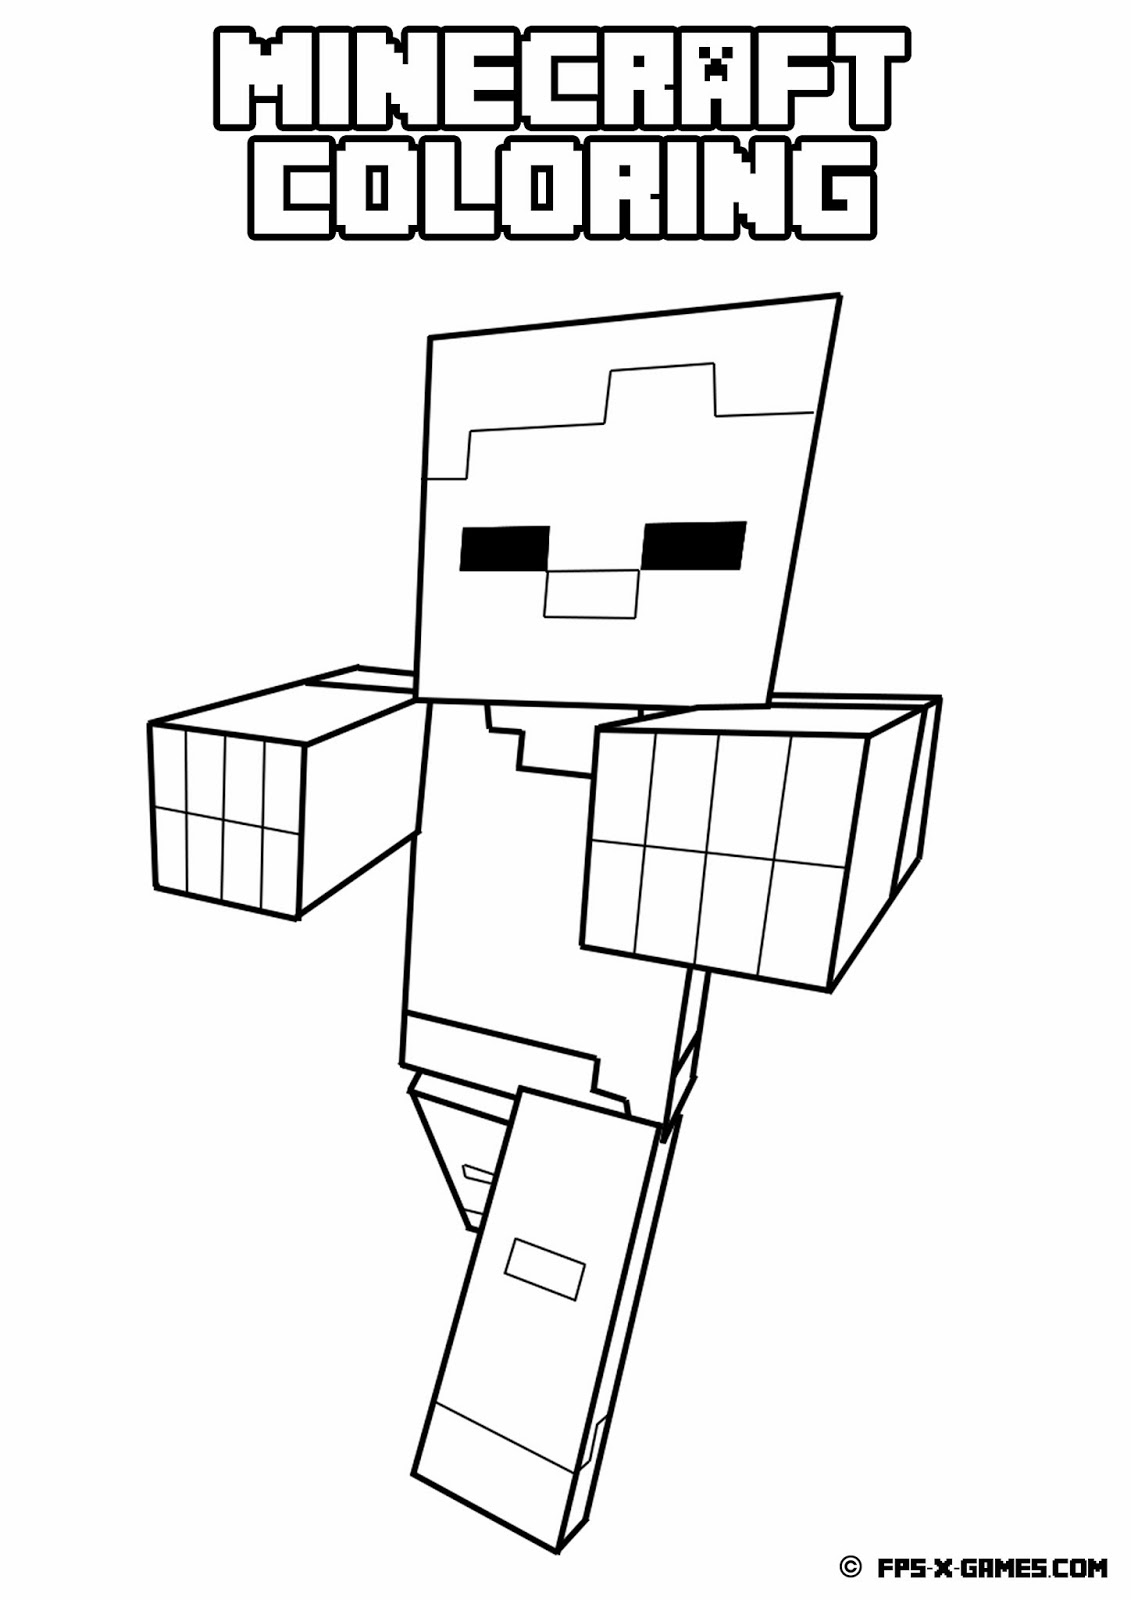 Free Coloring Pages Of Minecraft For Kids Coloring Wallpapers Download Free Images Wallpaper [coloring876.blogspot.com]